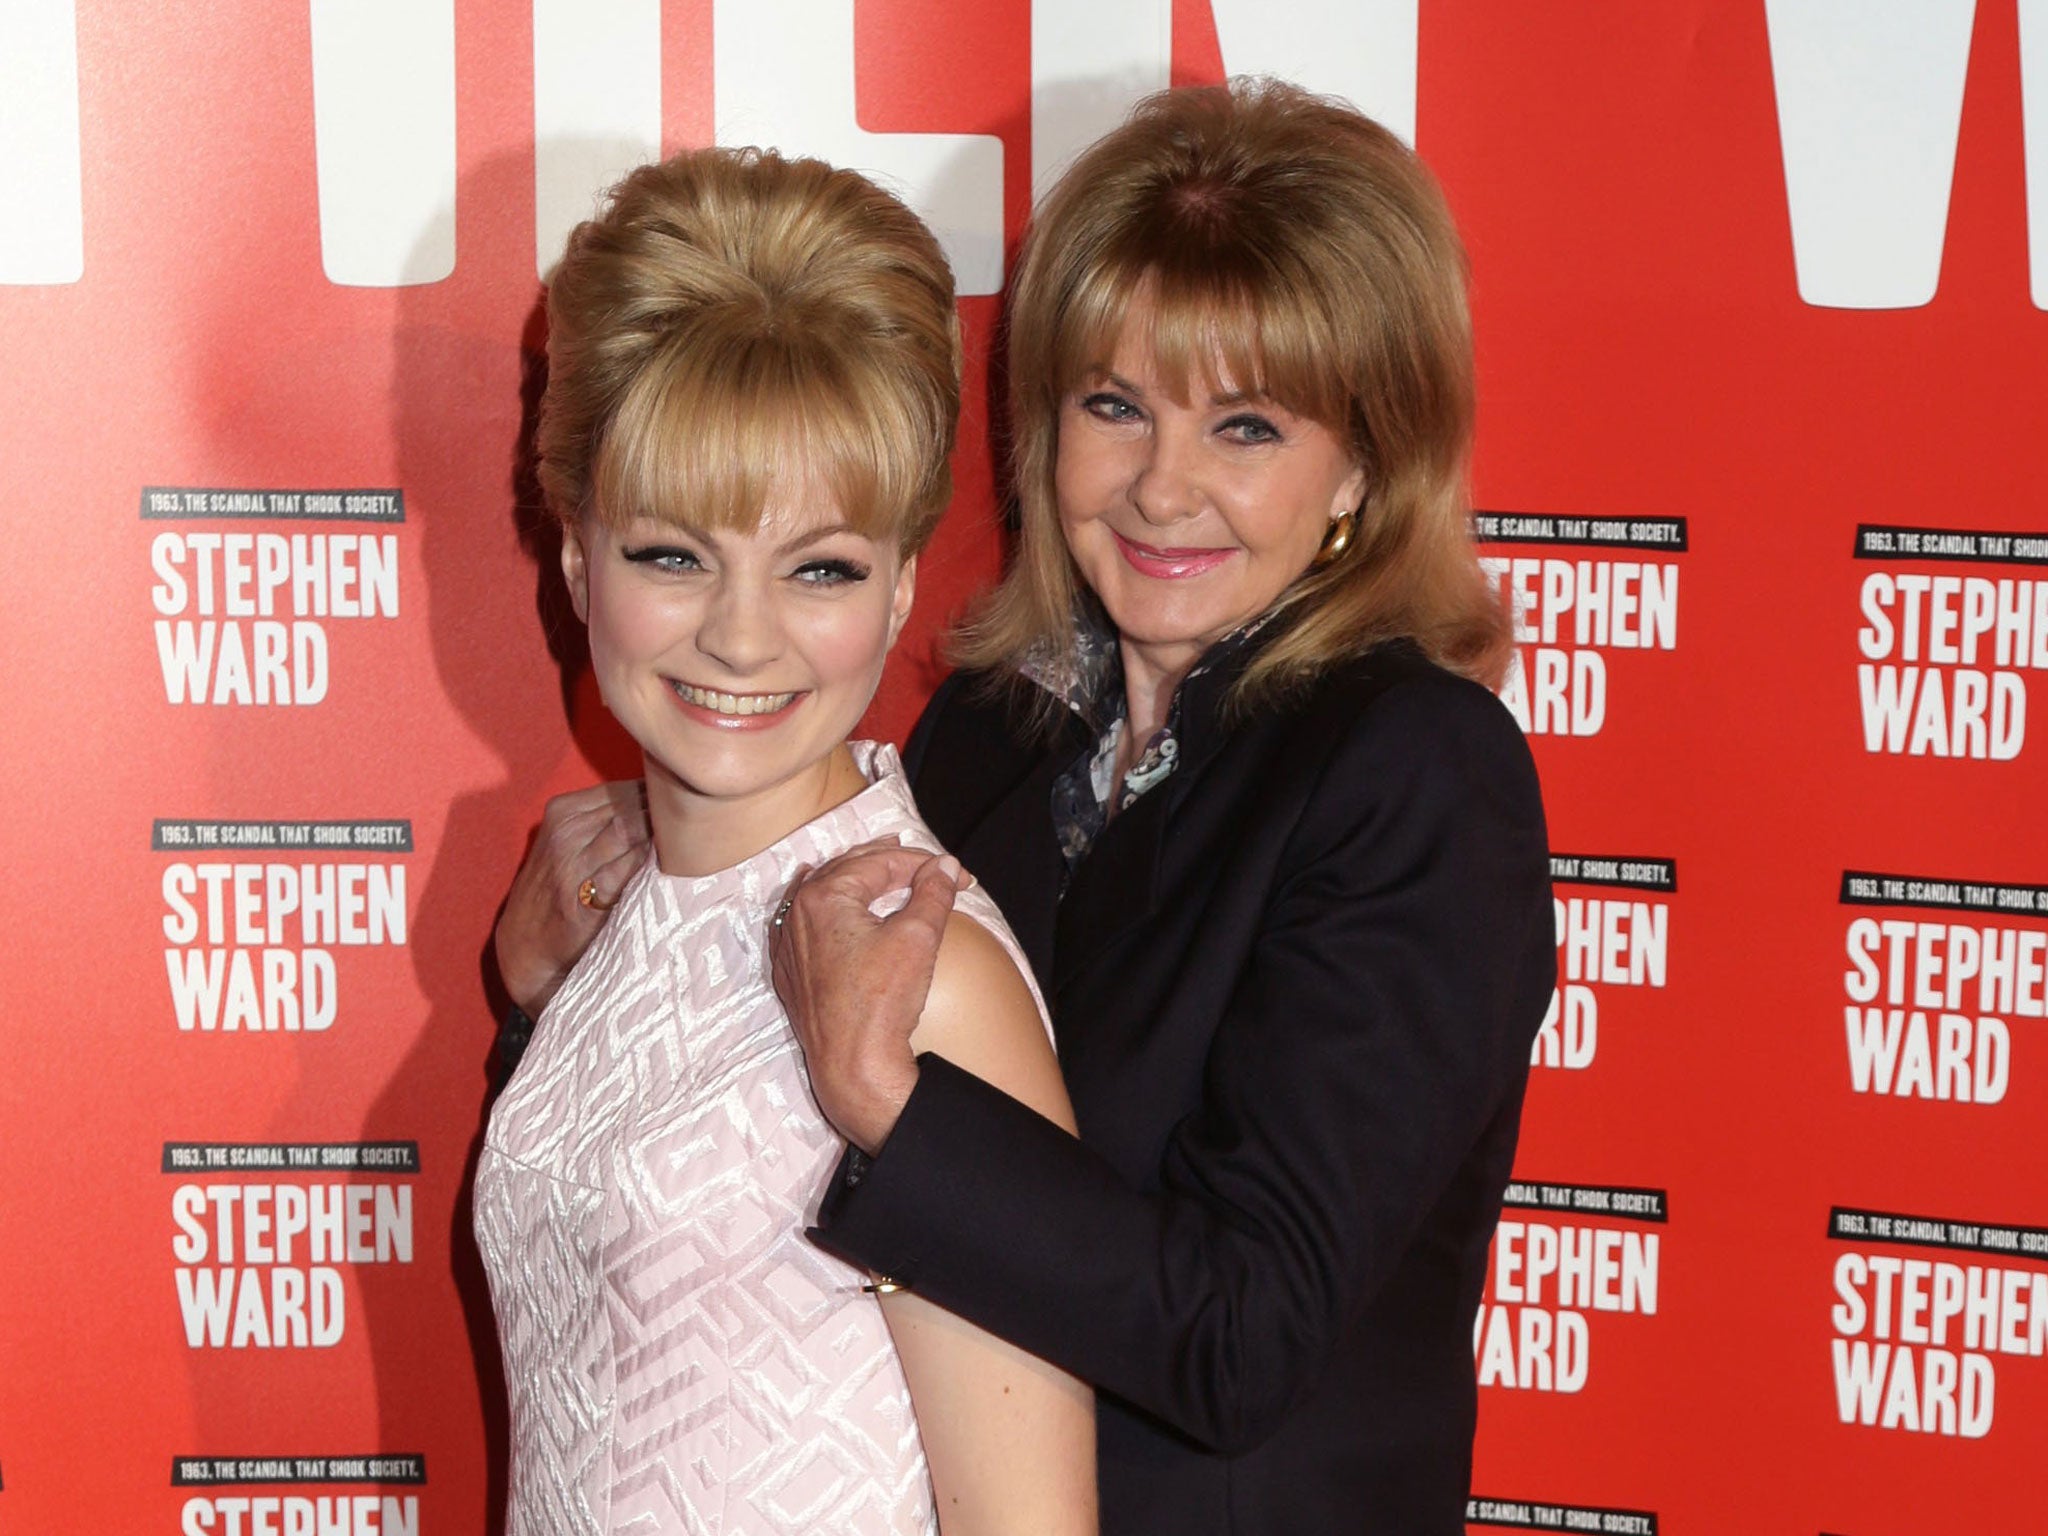 Mandy Rice Davies (right) with Charlotte Blackledge (left), who plays Mandy Rice Davies in the musical